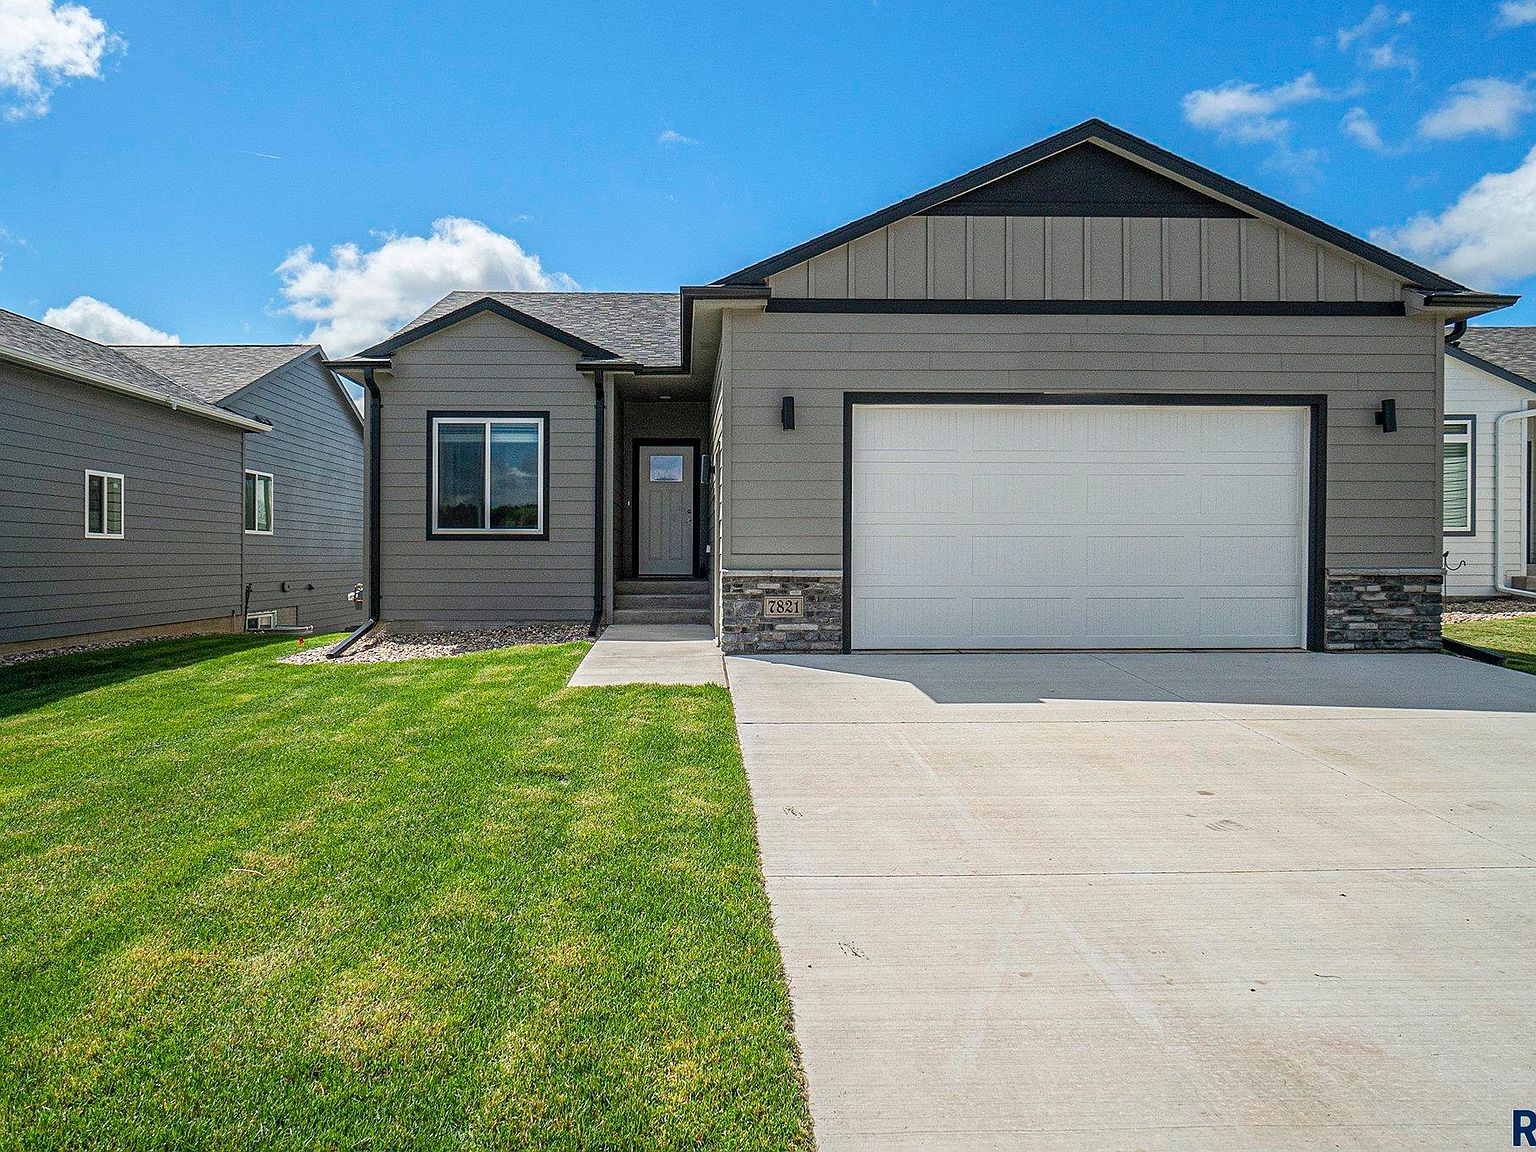 7821 E 44th St, Sioux Falls, SD 57110 | MLS #22403165 | Zillow